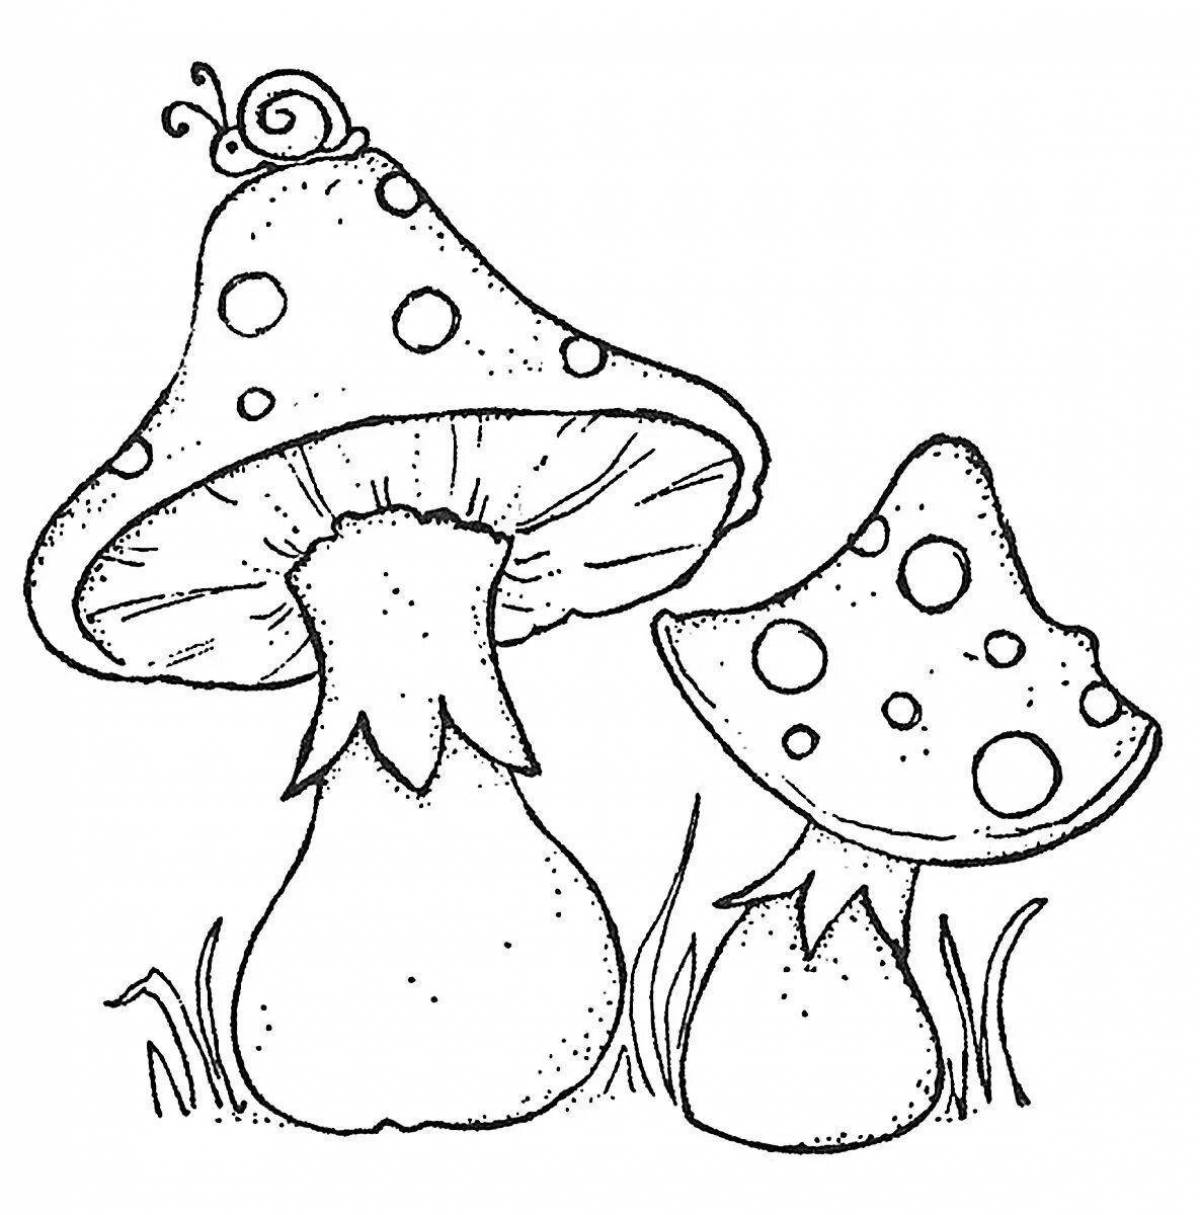 Coloring page graceful fly agaric frog